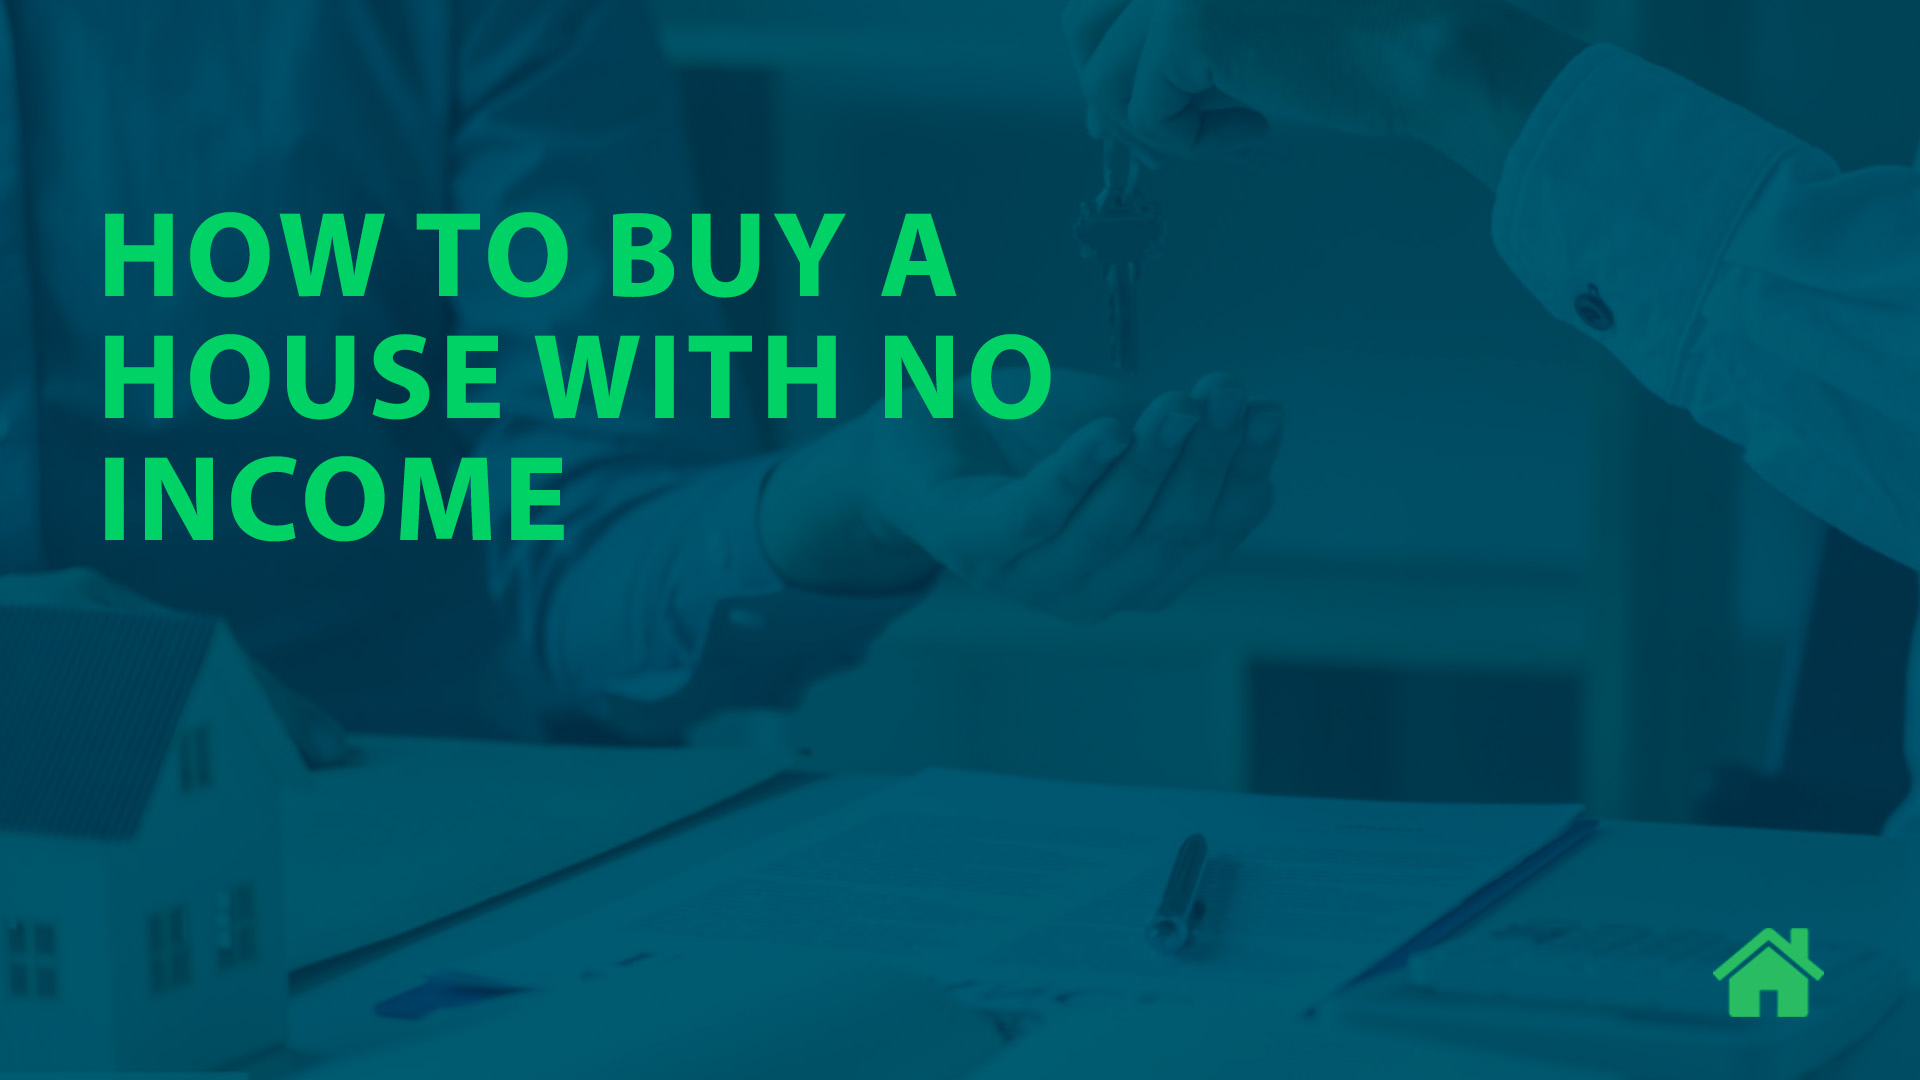 How to Buy a House with No Income